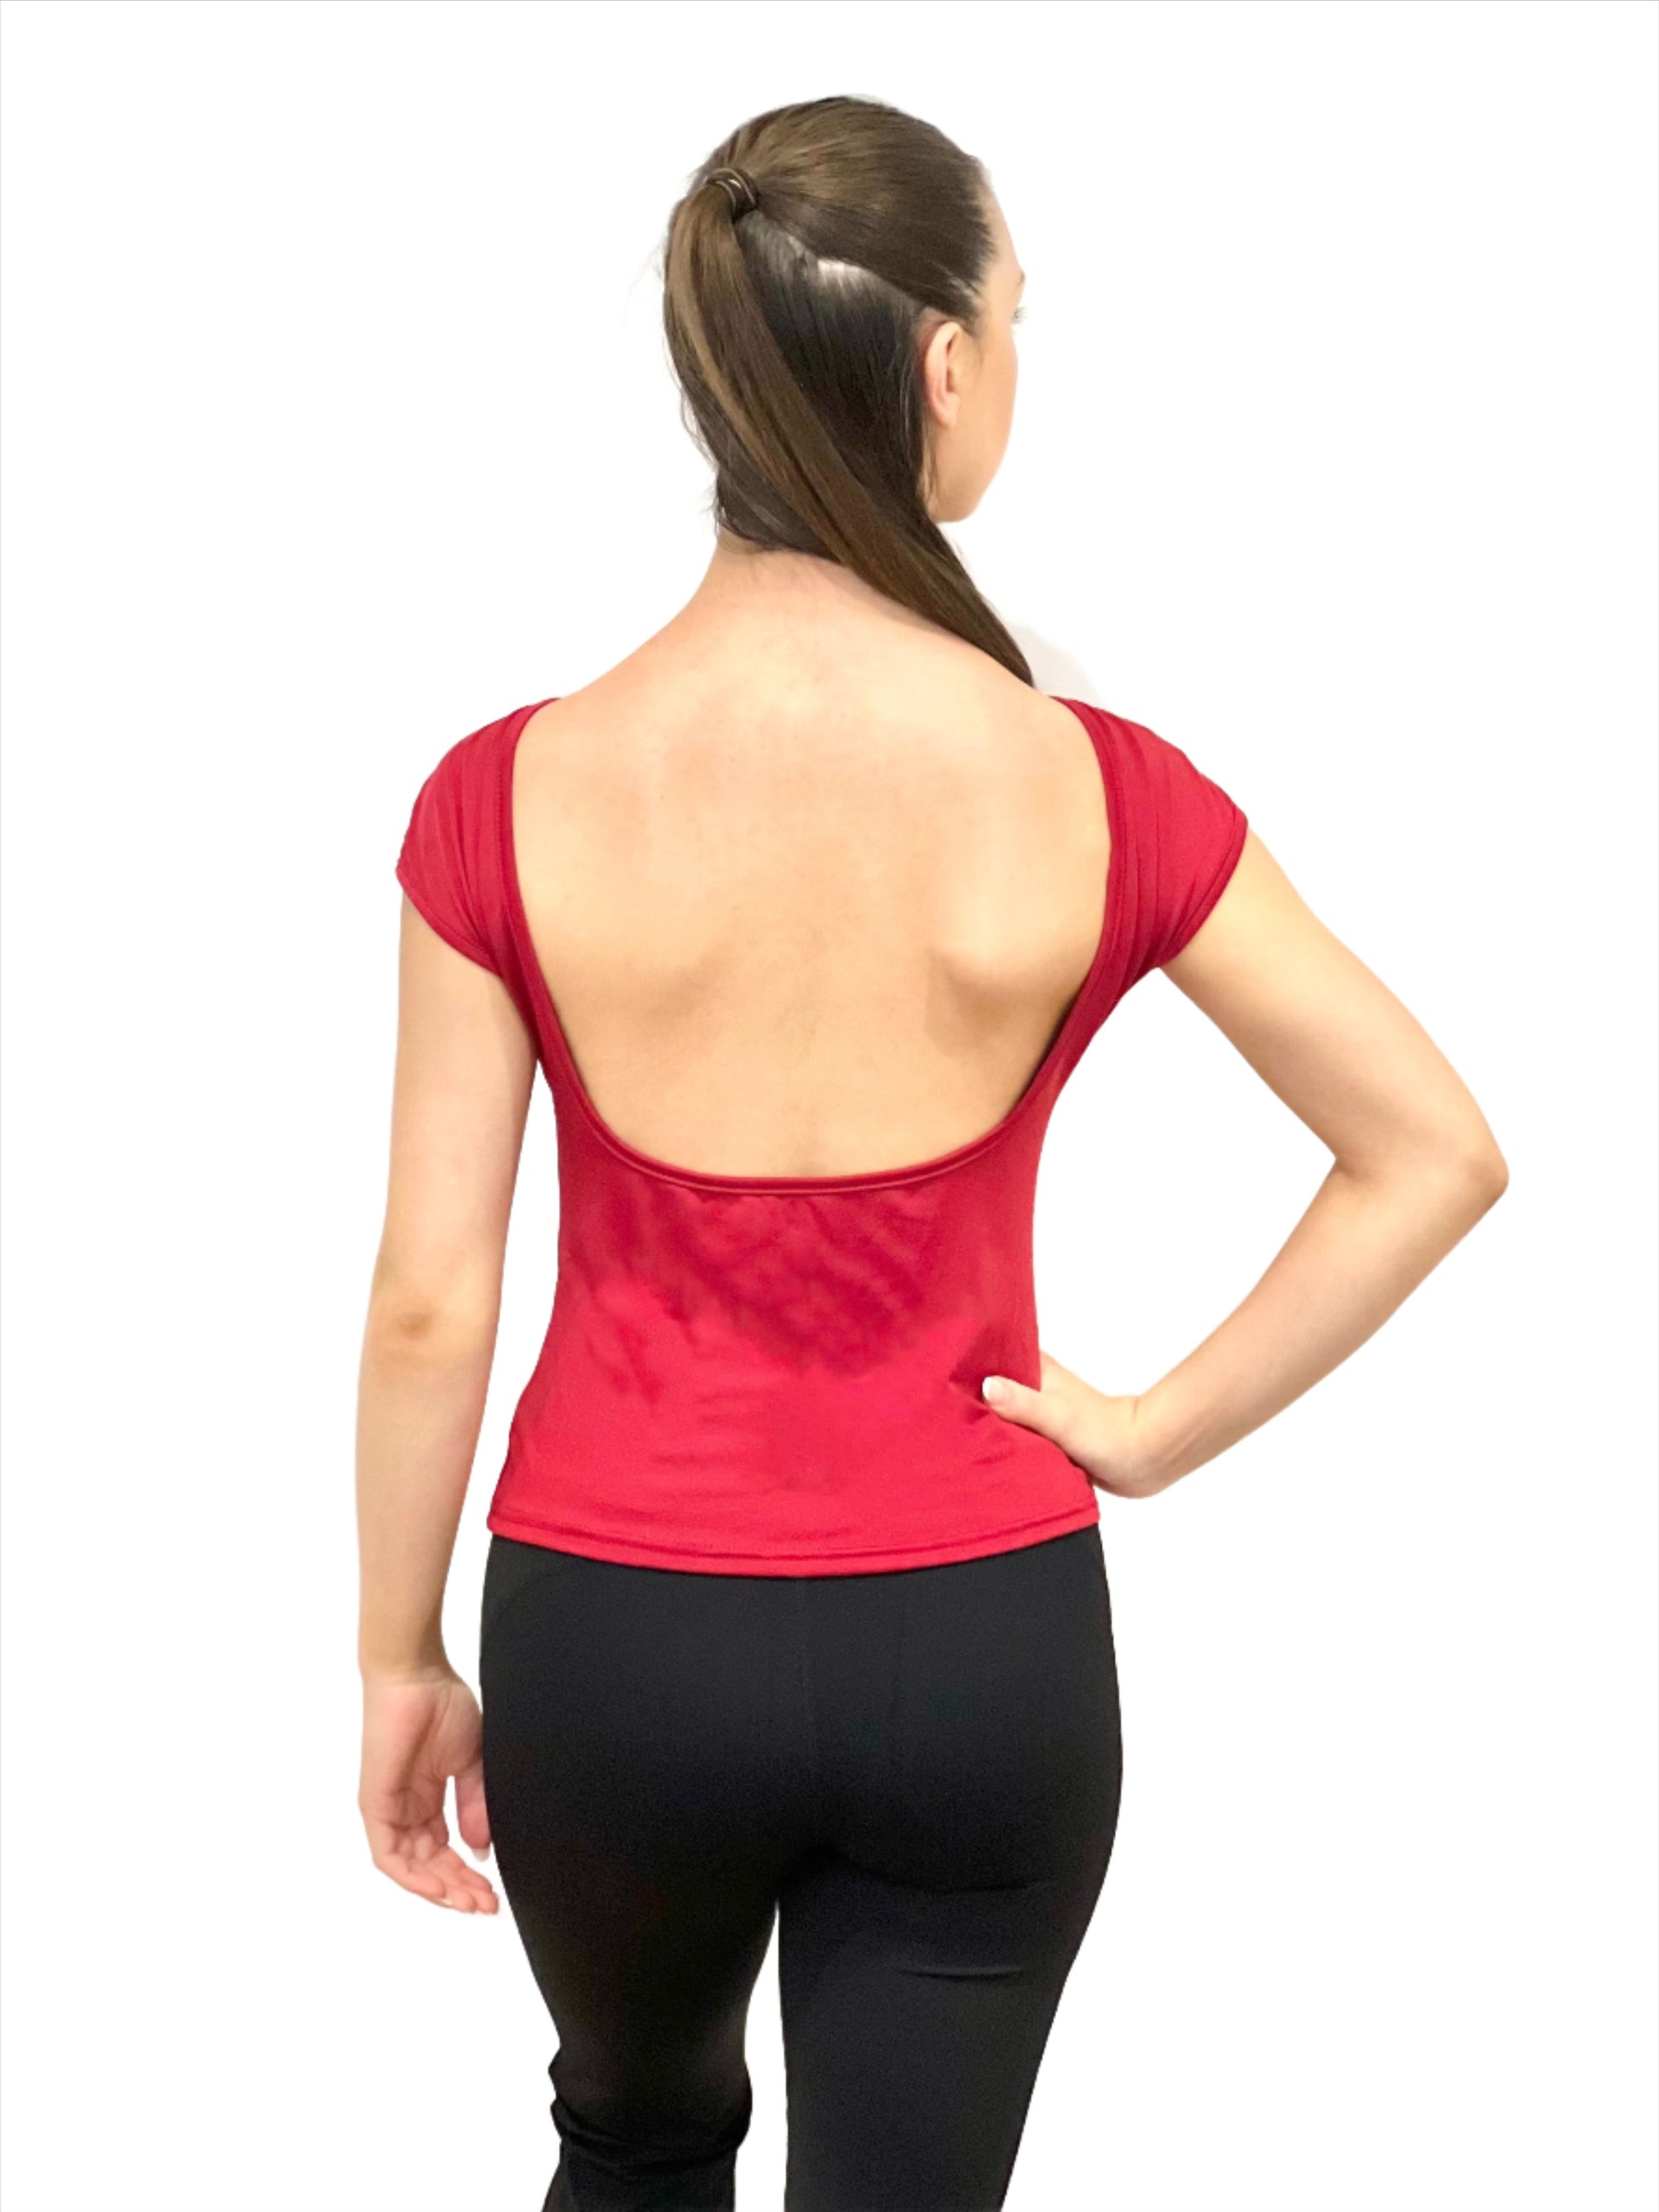 Open back top by The Collective Dancewear